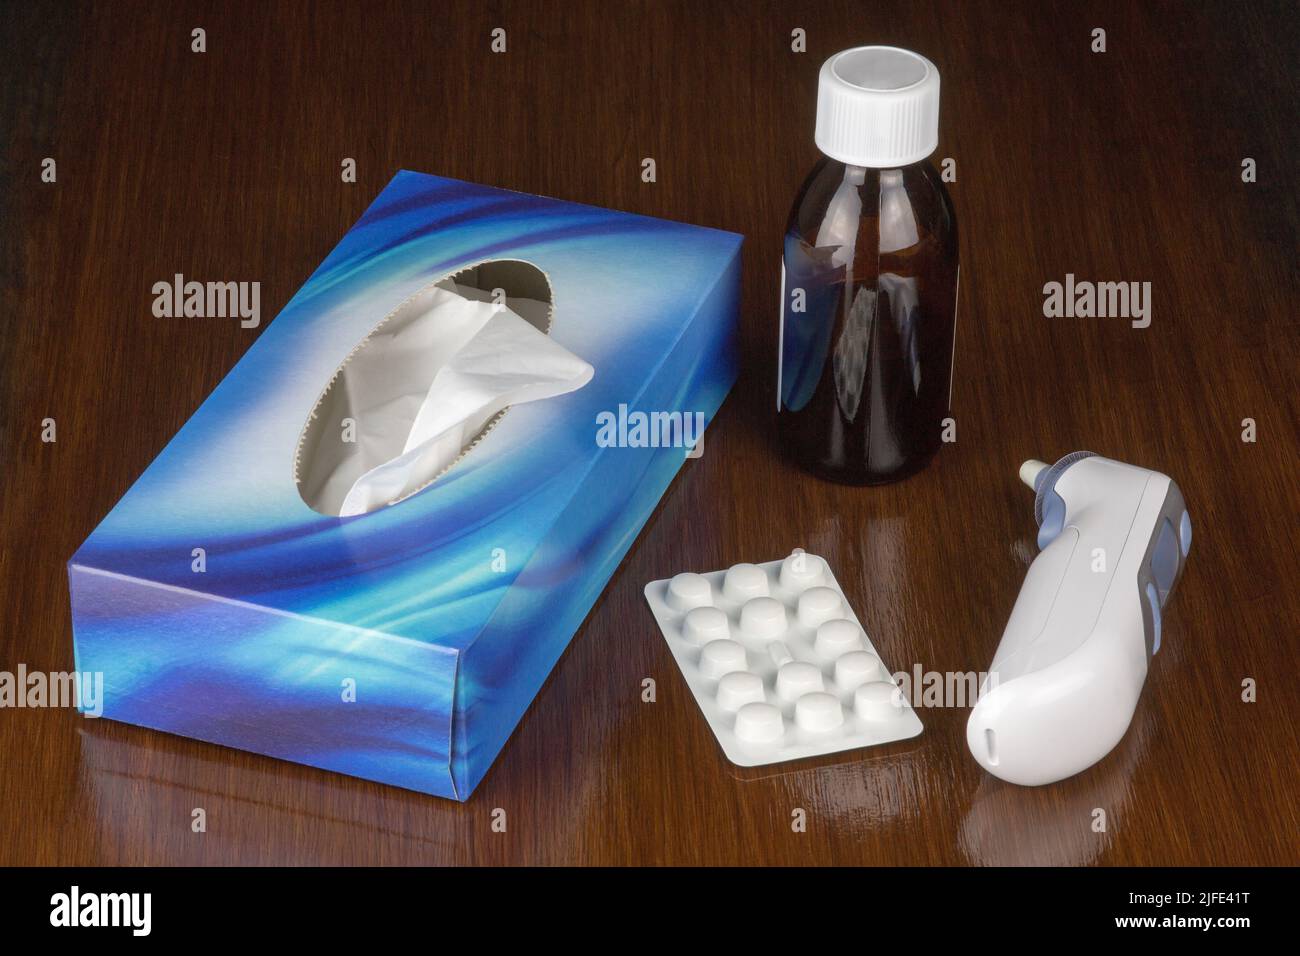 Medicine bottle with box of tissues thermometer and tablets on a polished table surface Stock Photo